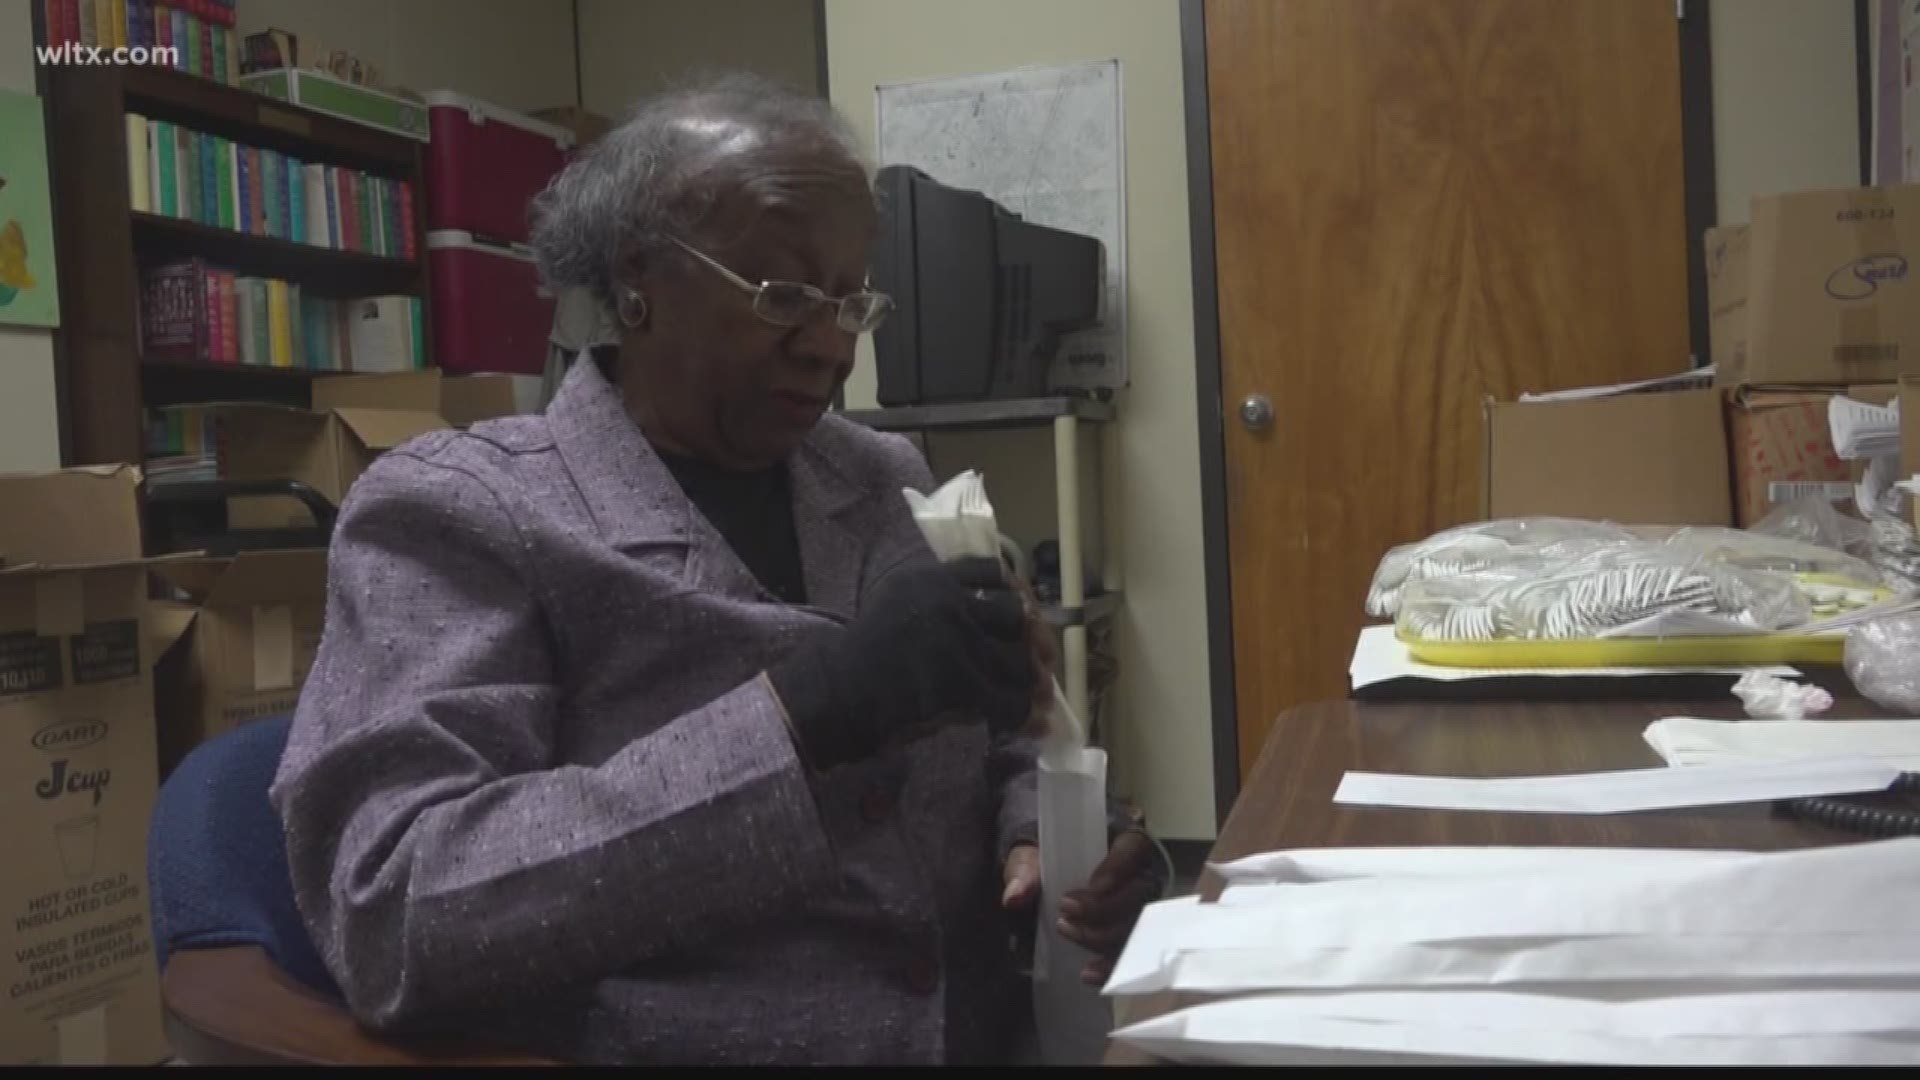 A woman in Orangeburg County is making it her goal to serve her community.